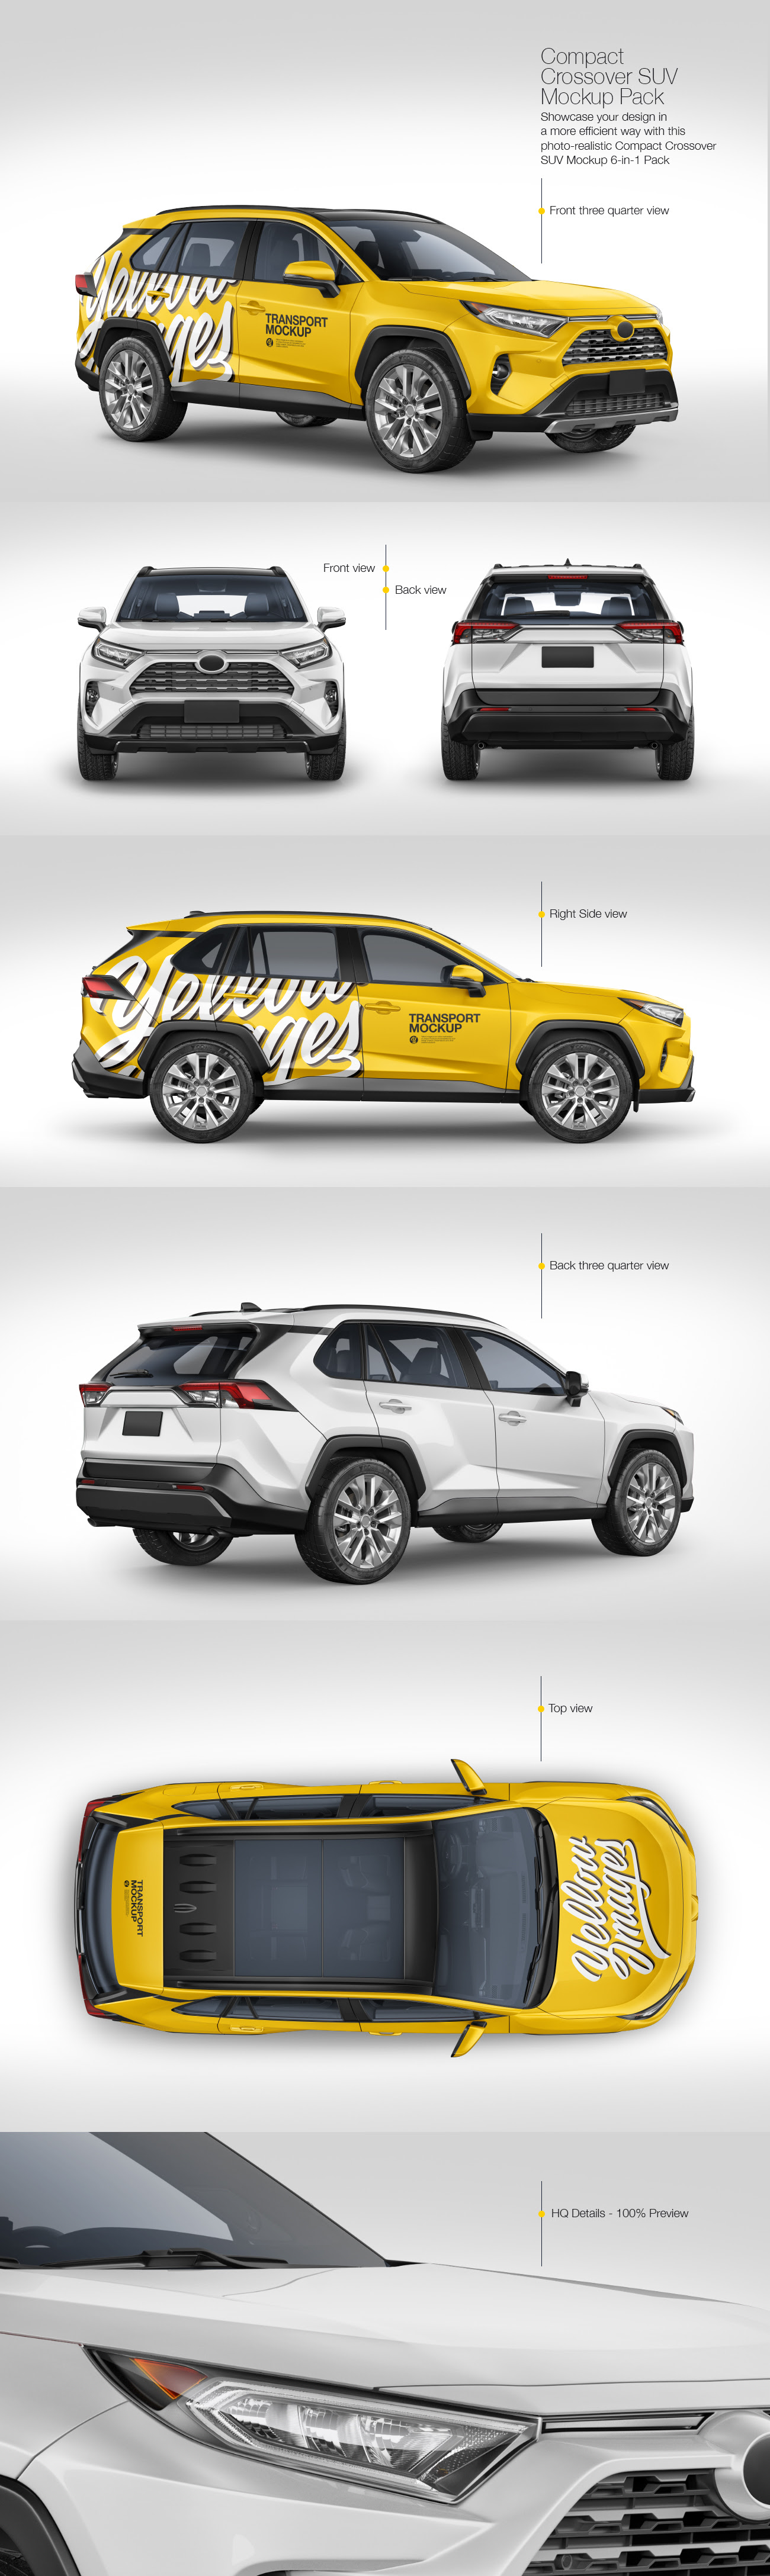 Compact Crossover SUV Mockup Pack in Handpicked Sets of Vehicles on